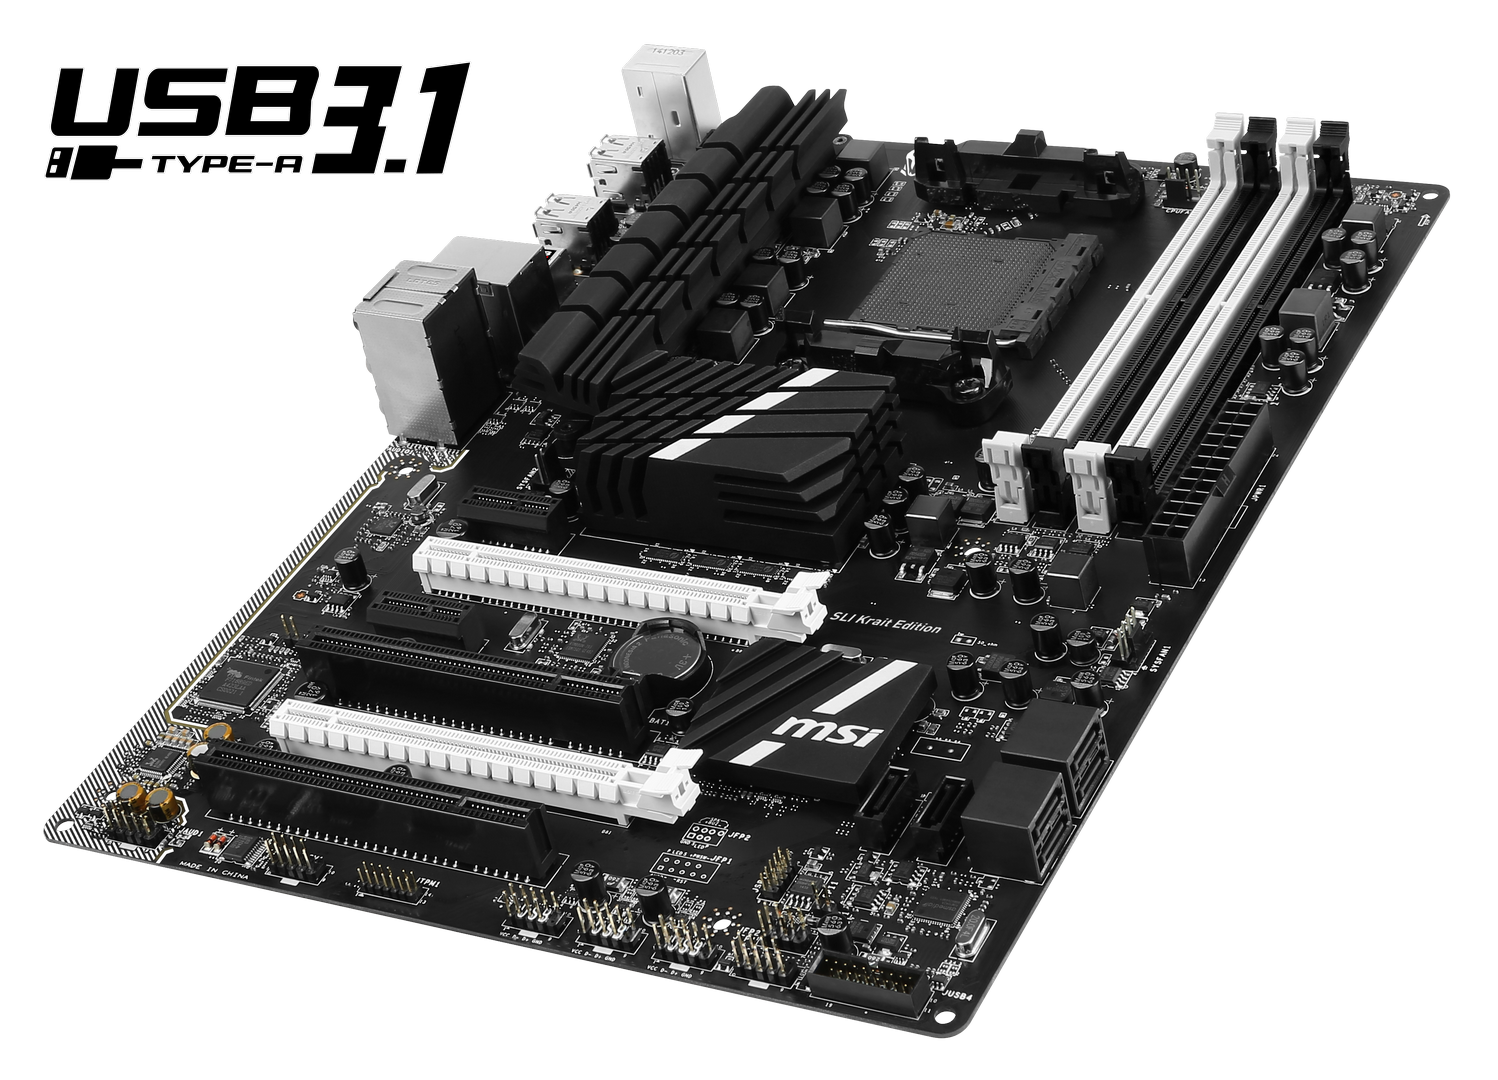 MSI Releases 970A SLI Krait Edition Motherboard with USB 3.1